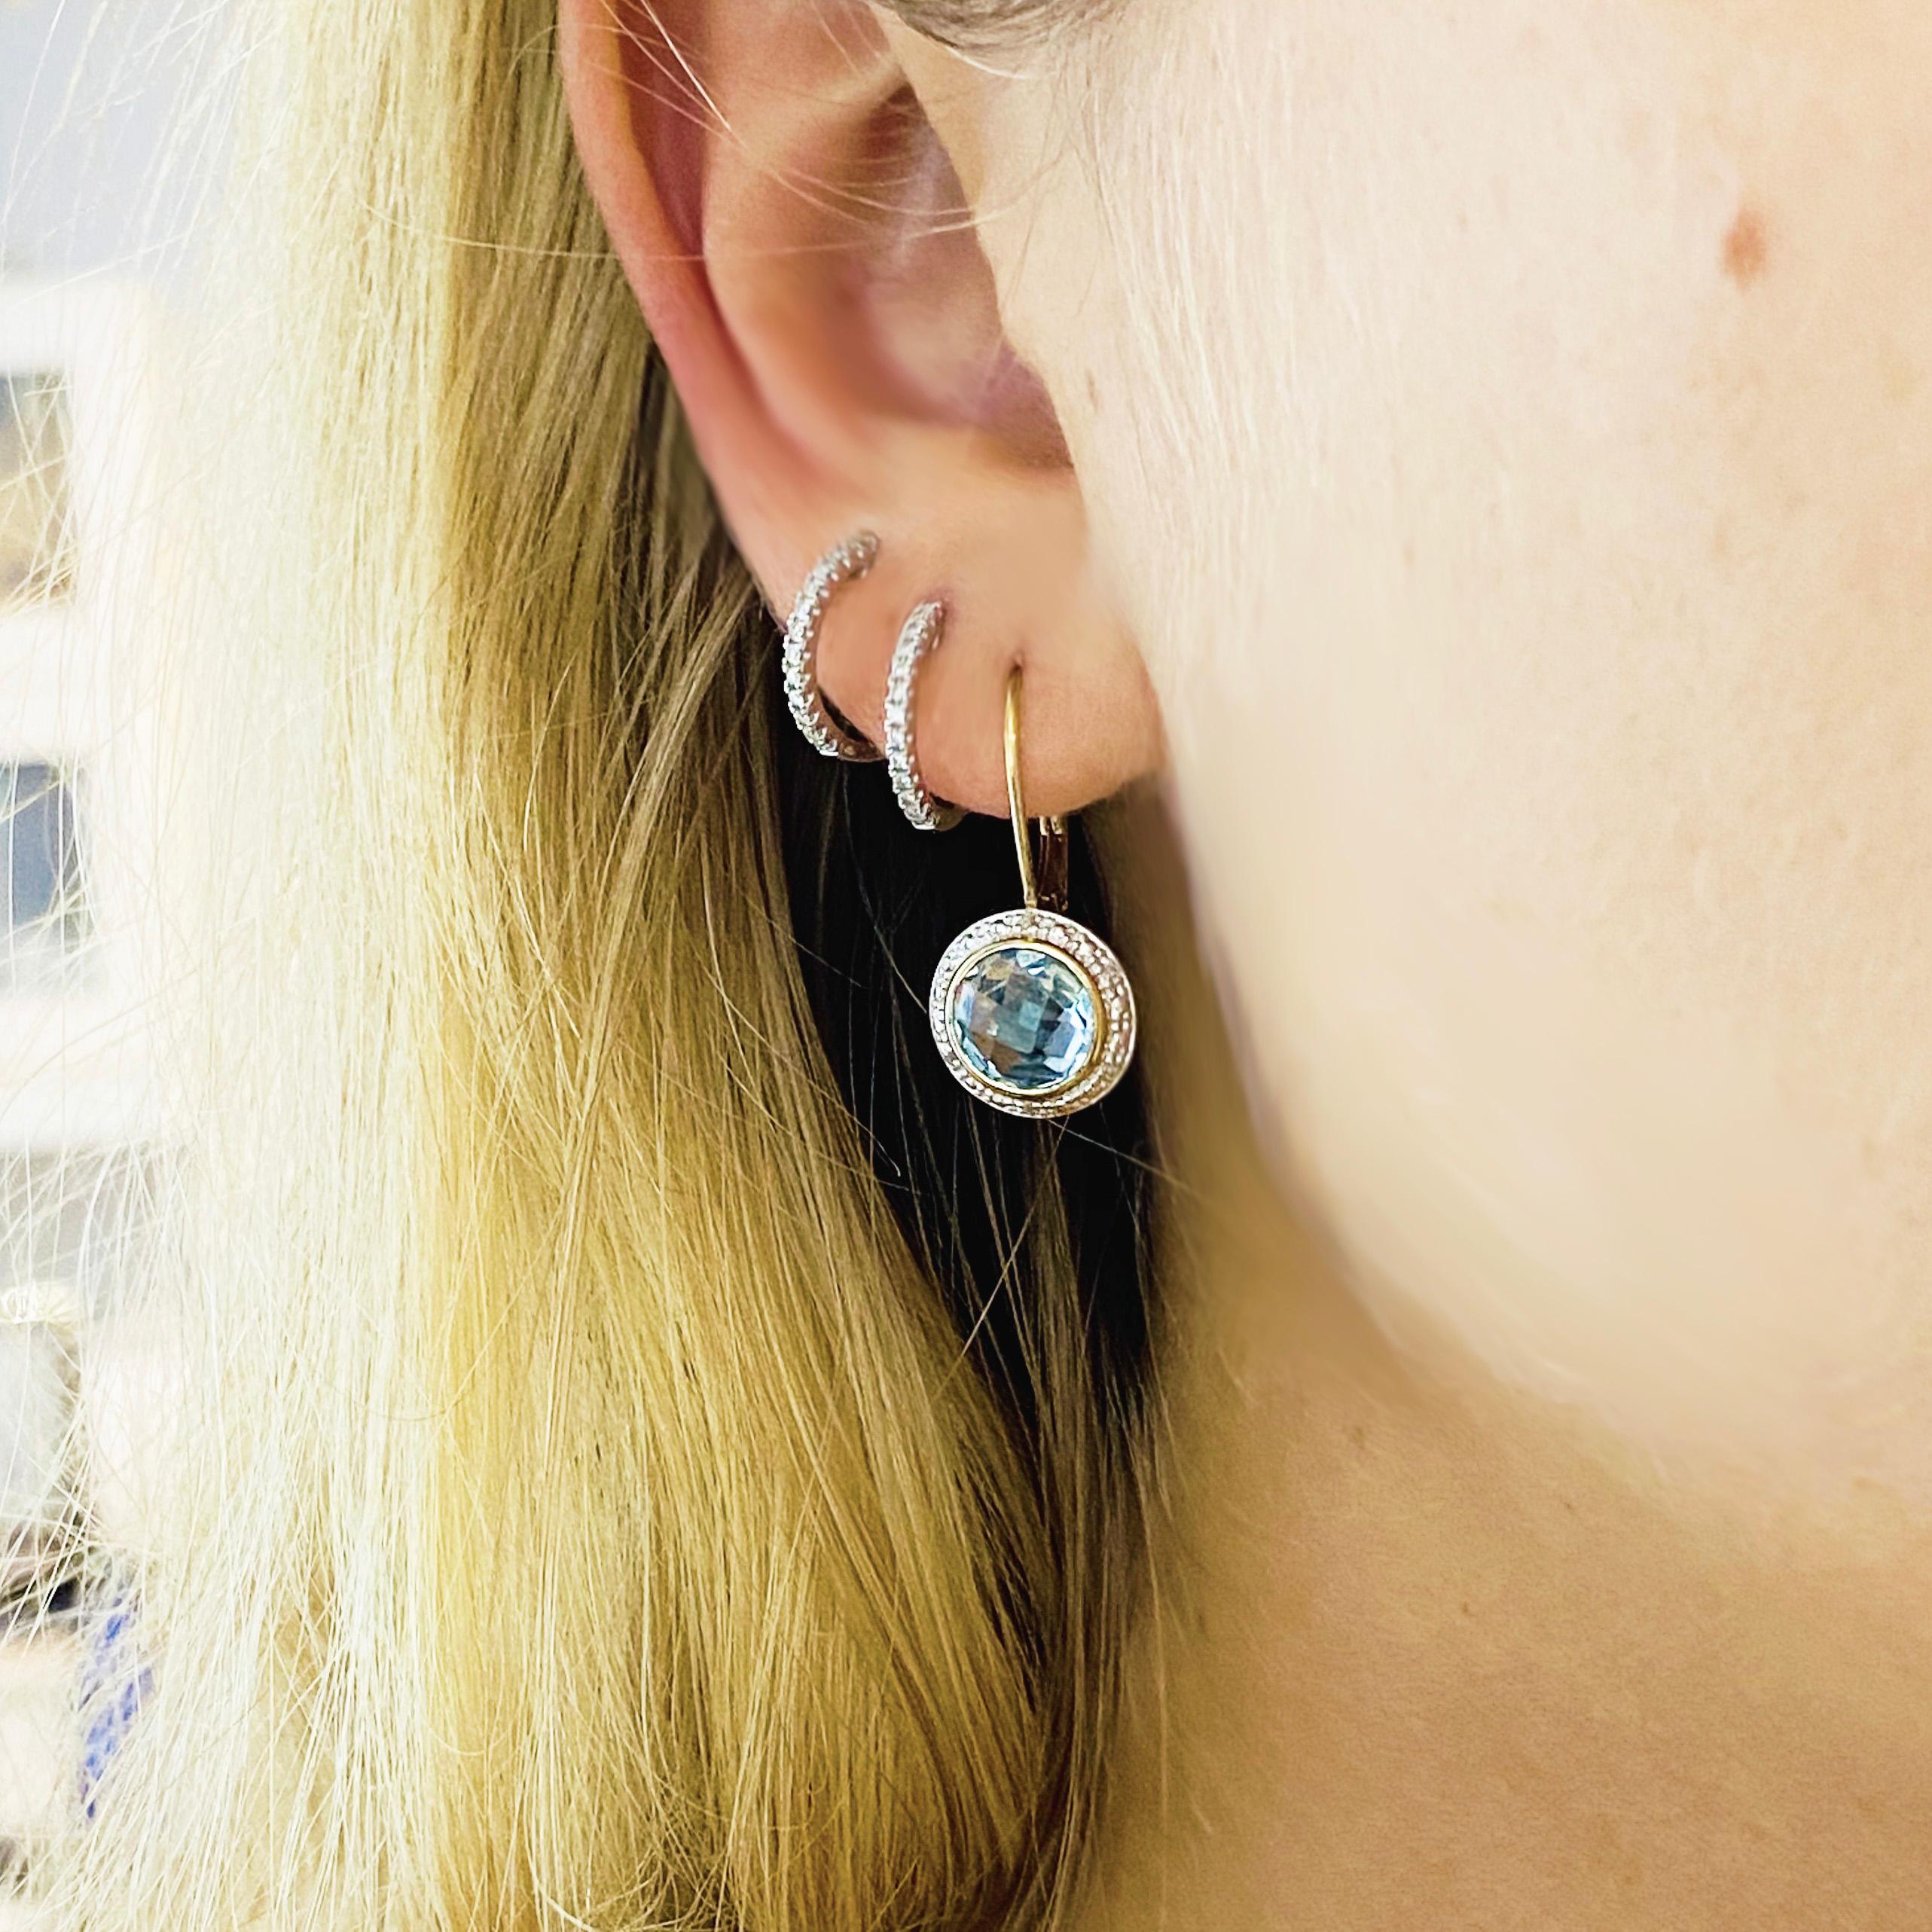 These earrings have a matching pendant, as pictured in photo slide. The necklace is listed on our storefront and can be purchased with the earrings to create a perfect, fine jewelry set! 
The earrings are adorable with leverbacks that are 14 karat